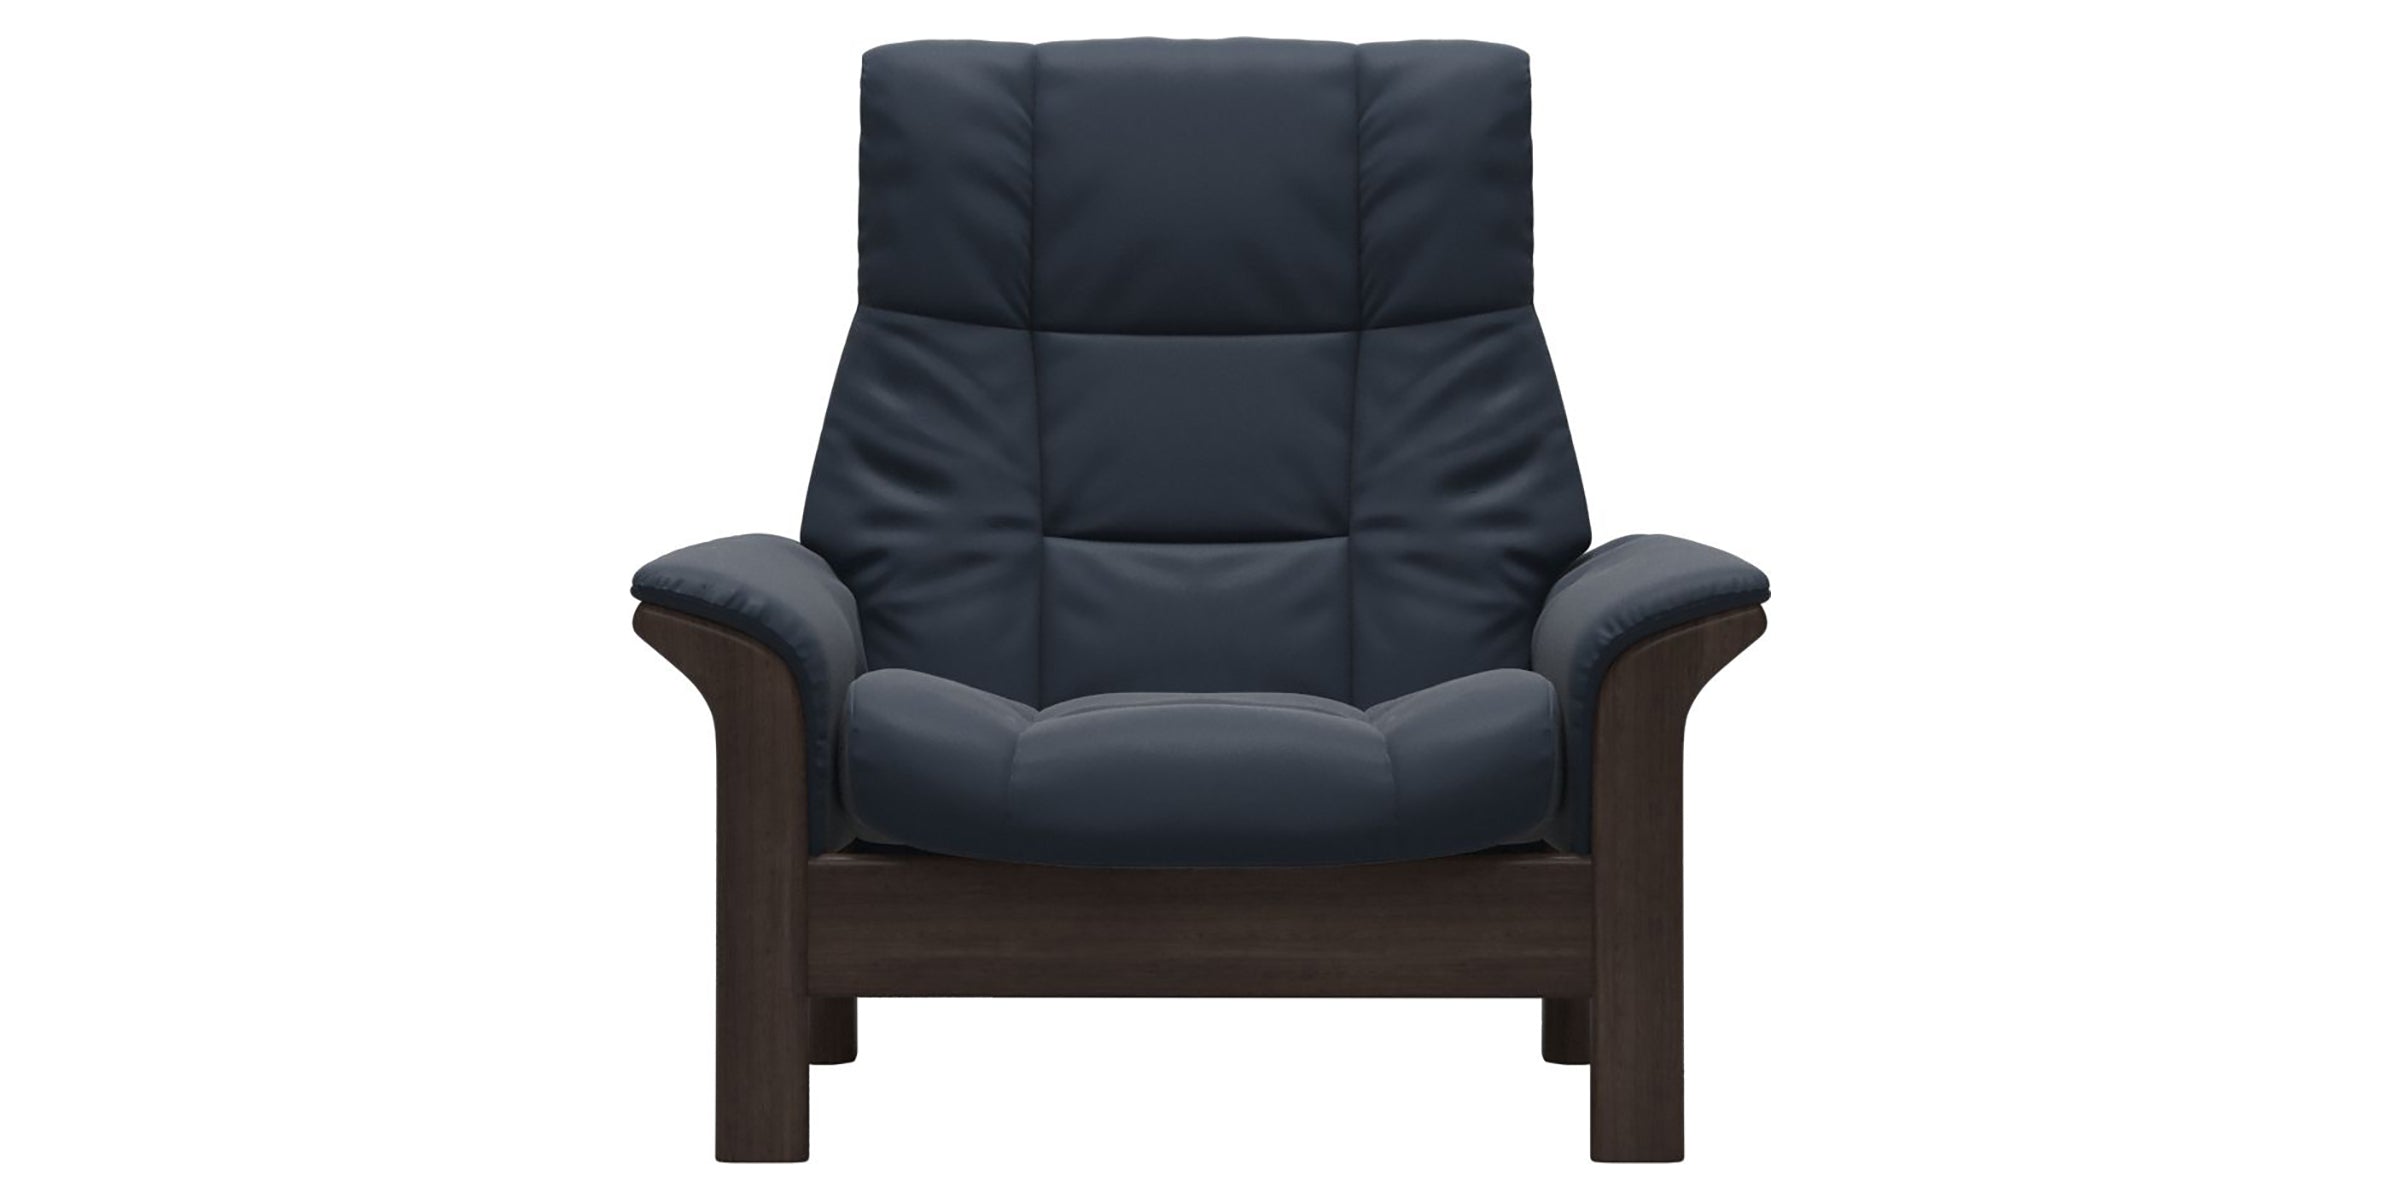 Paloma Leather Oxford Blue and Wenge Base | Stressless Buckingham High Back Chair | Valley Ridge Furniture